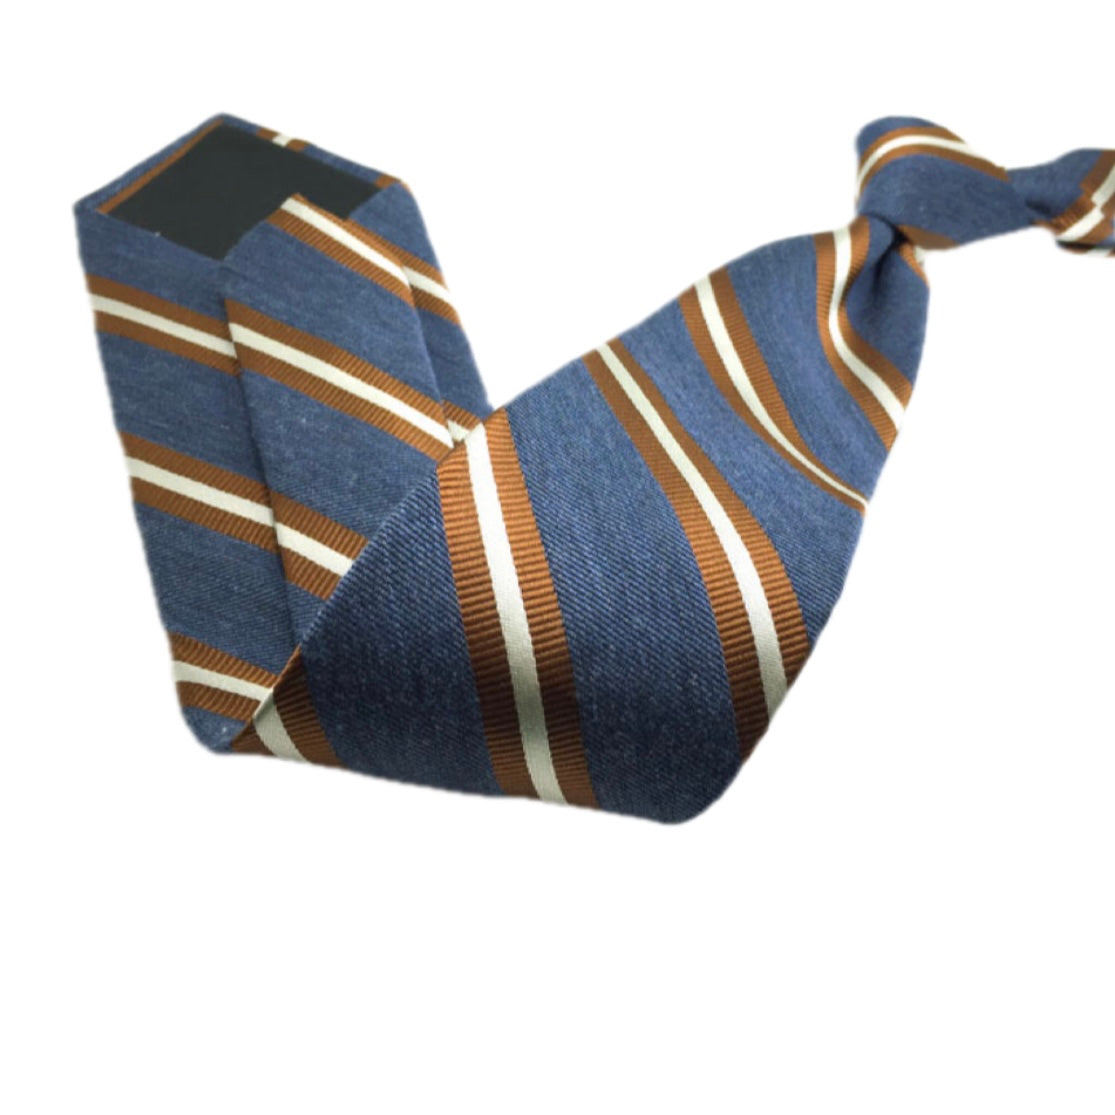 Blue Striped Silk and Wool Tie